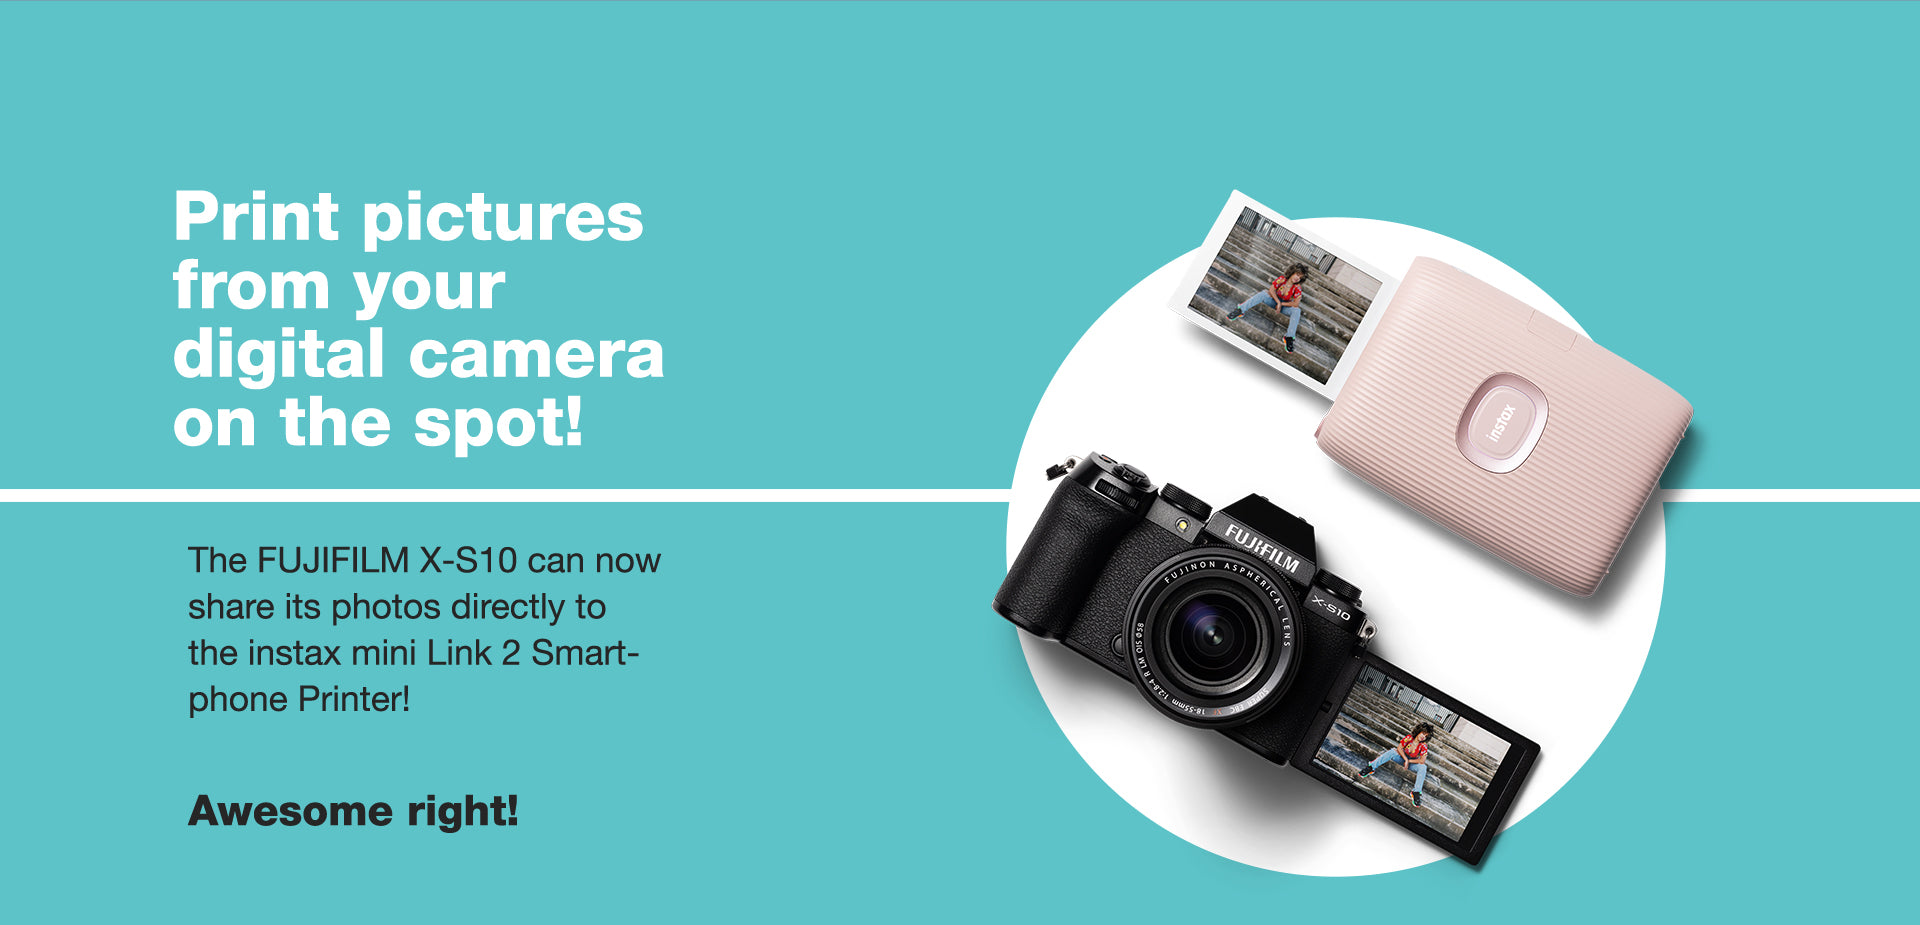 Instax Mini Link 2 - Easy photo sharing with X-S10 camera